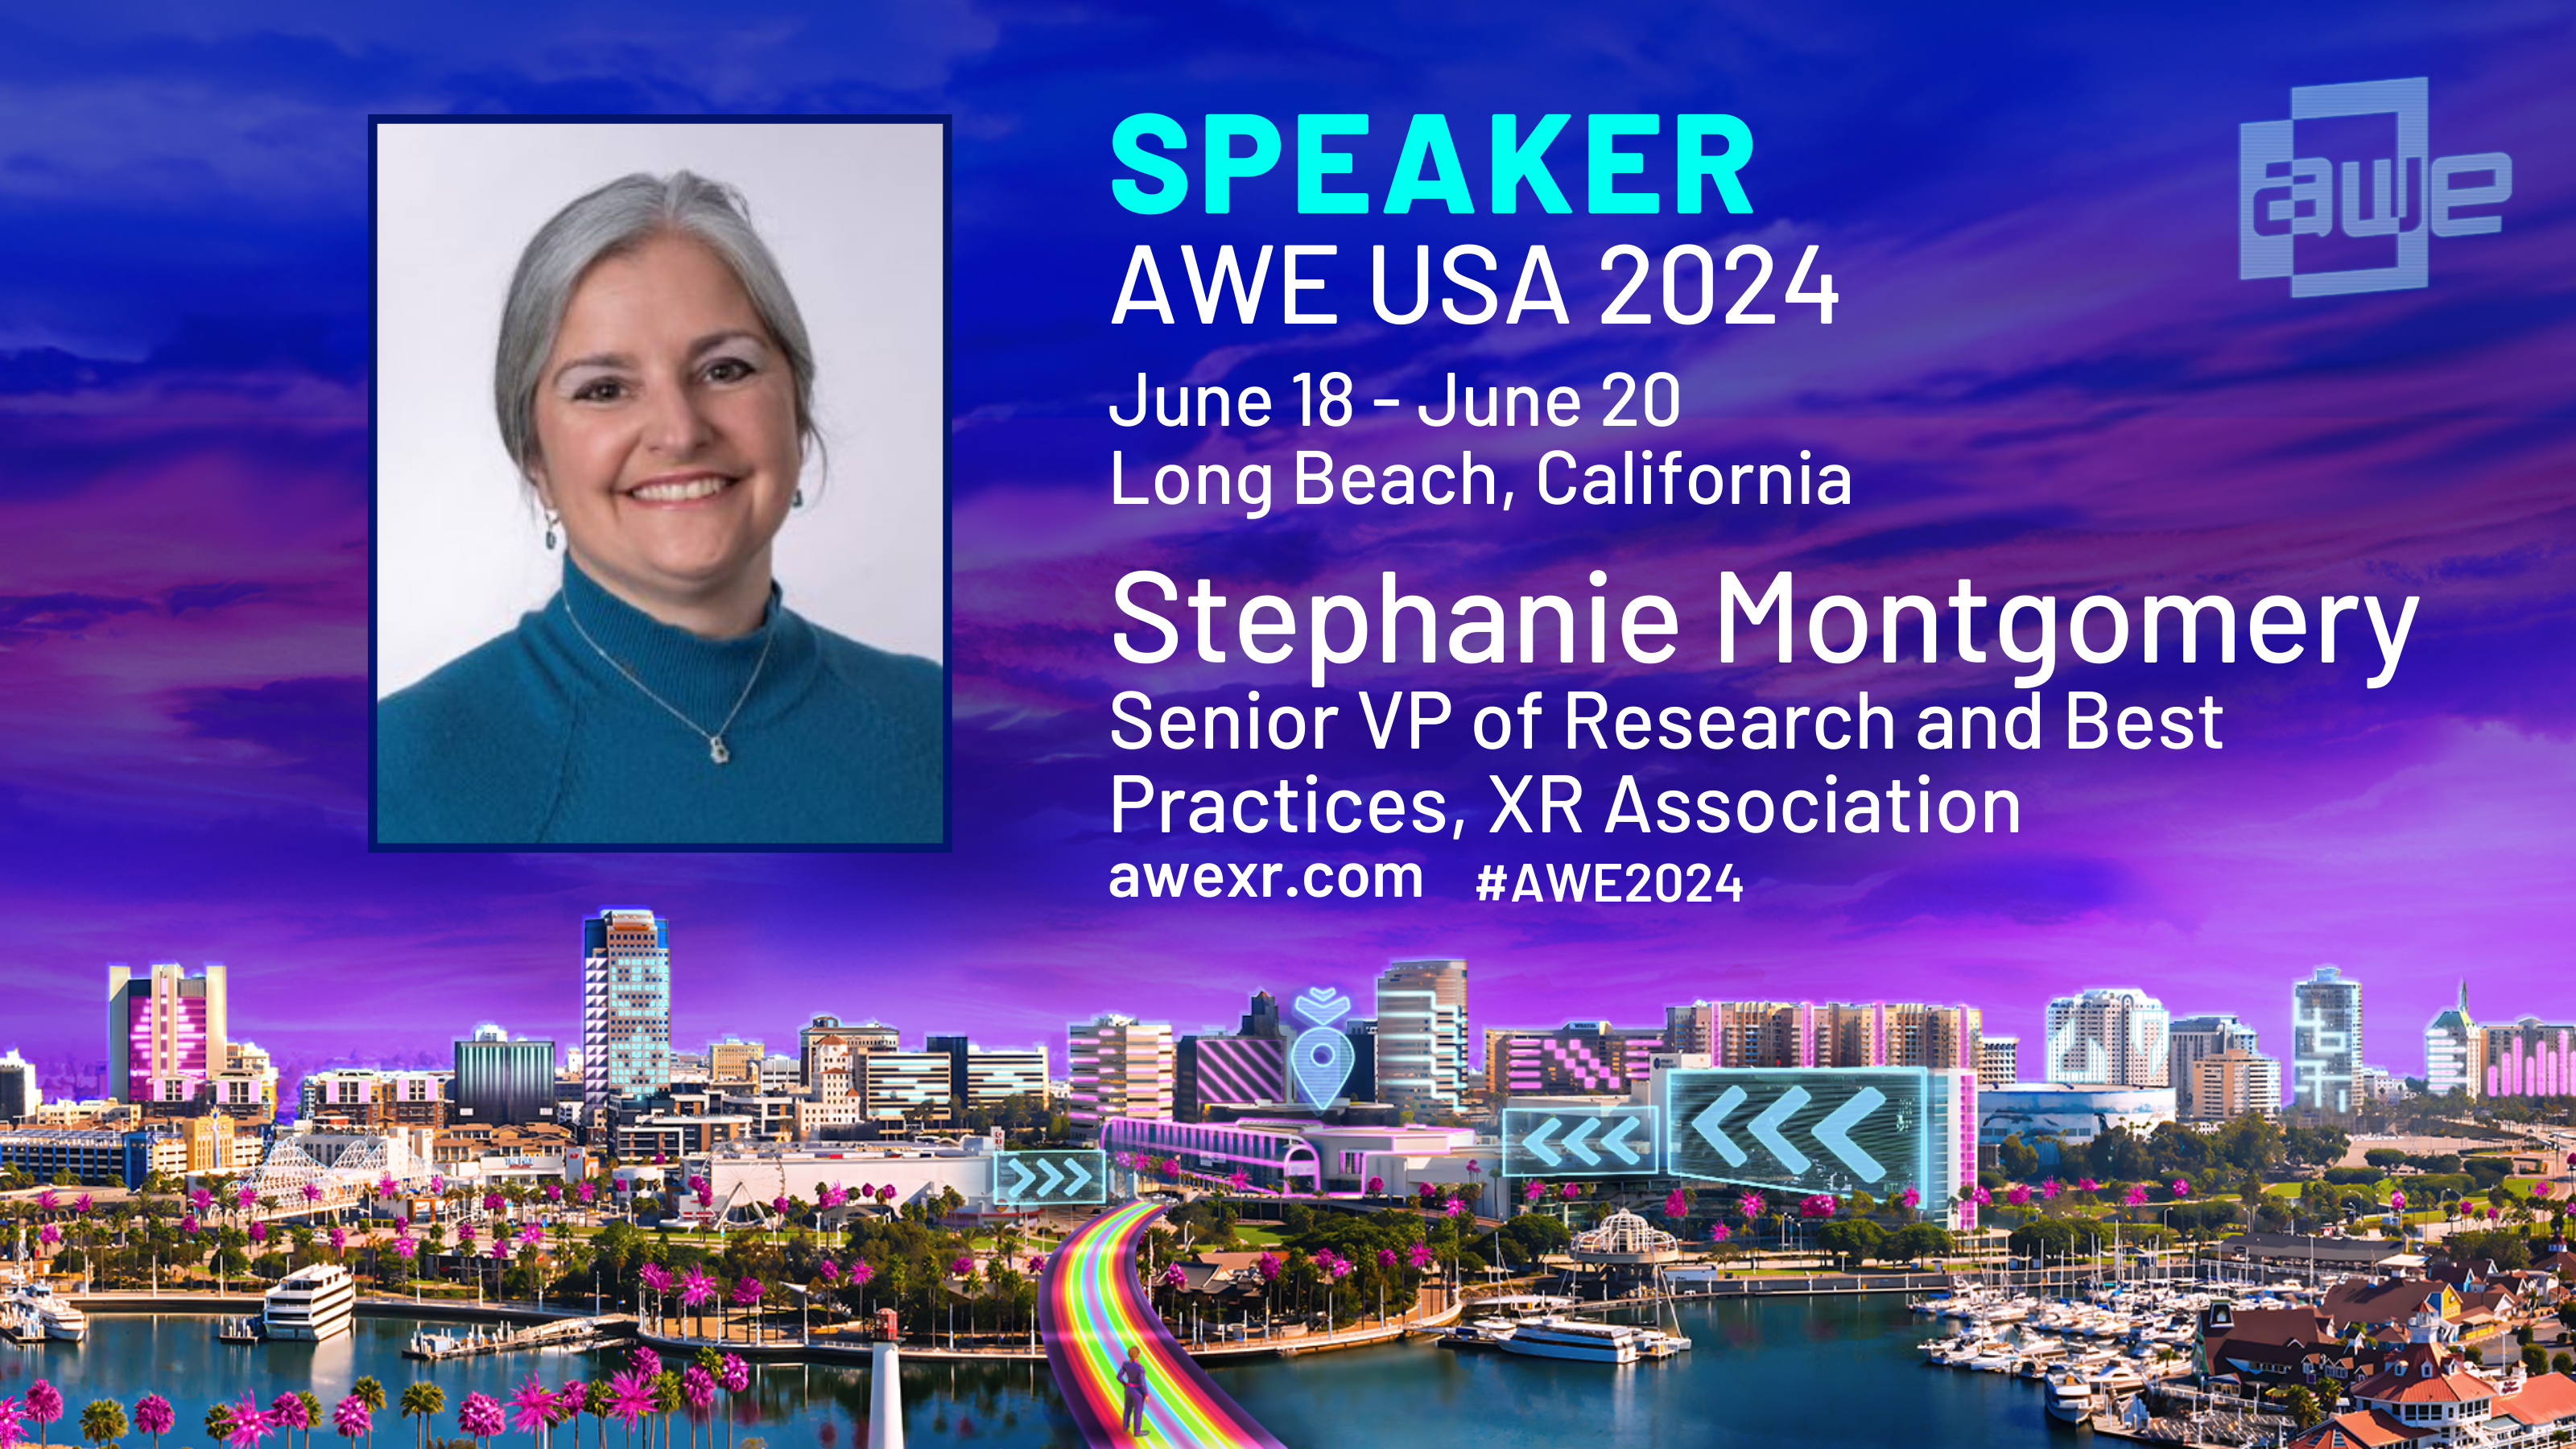 XRA’S SENIOR VICE PRESIDENT OF RESEARCH AND BEST PRACTICES TO HOST FIRESIDE CHAT AT AWE 2024